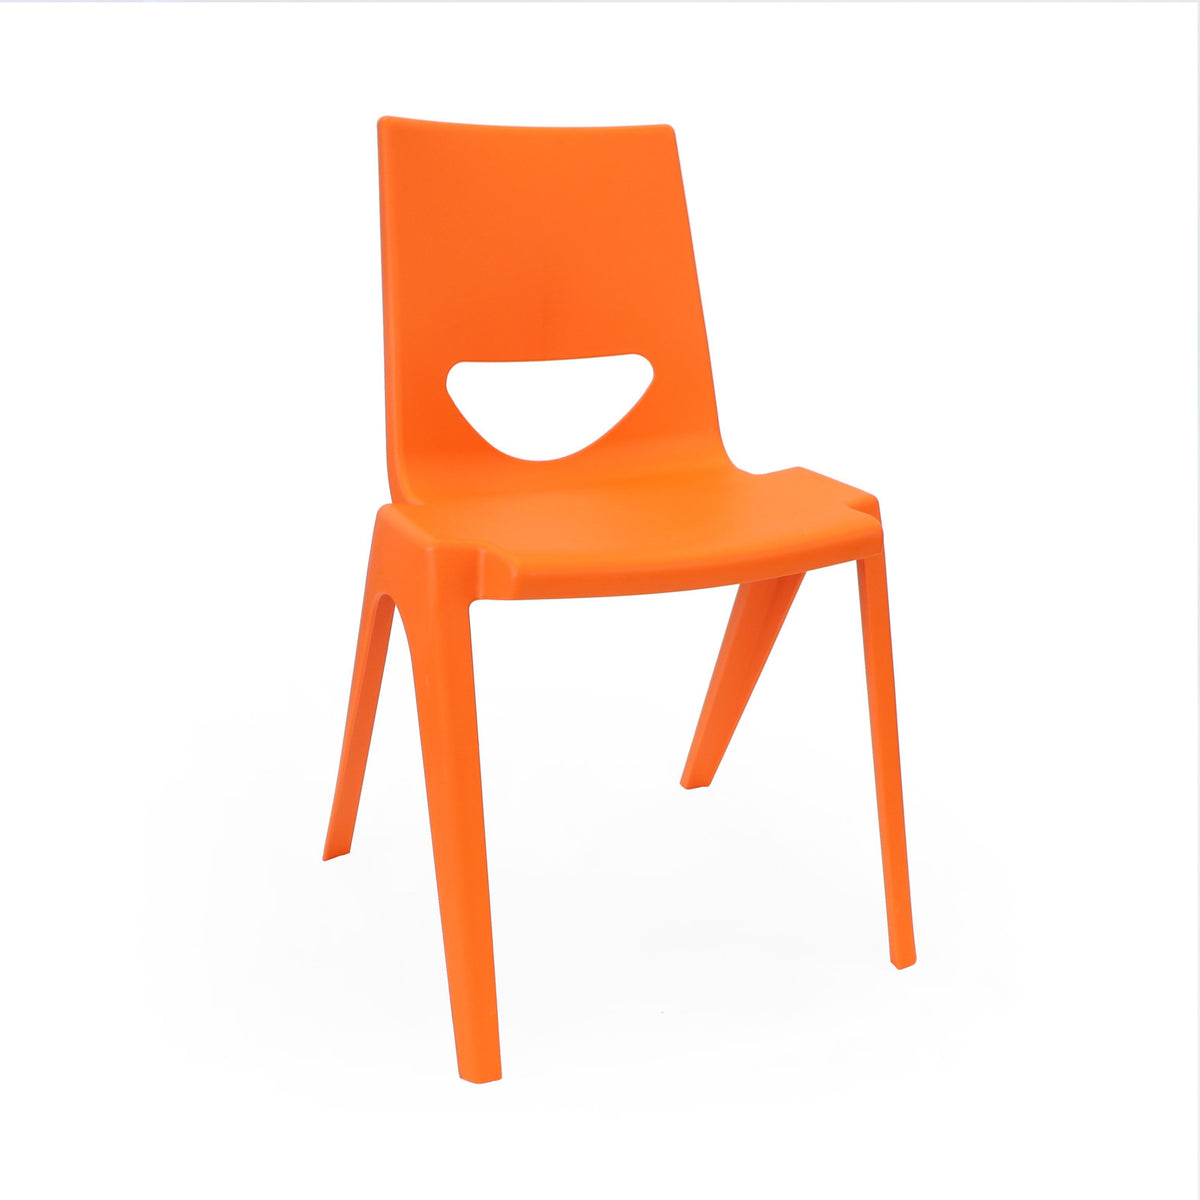 classroom chairs Size 5 - Seat Height 430 mm EN One Classroom Chair Size 5 - Seat Height 430 mm